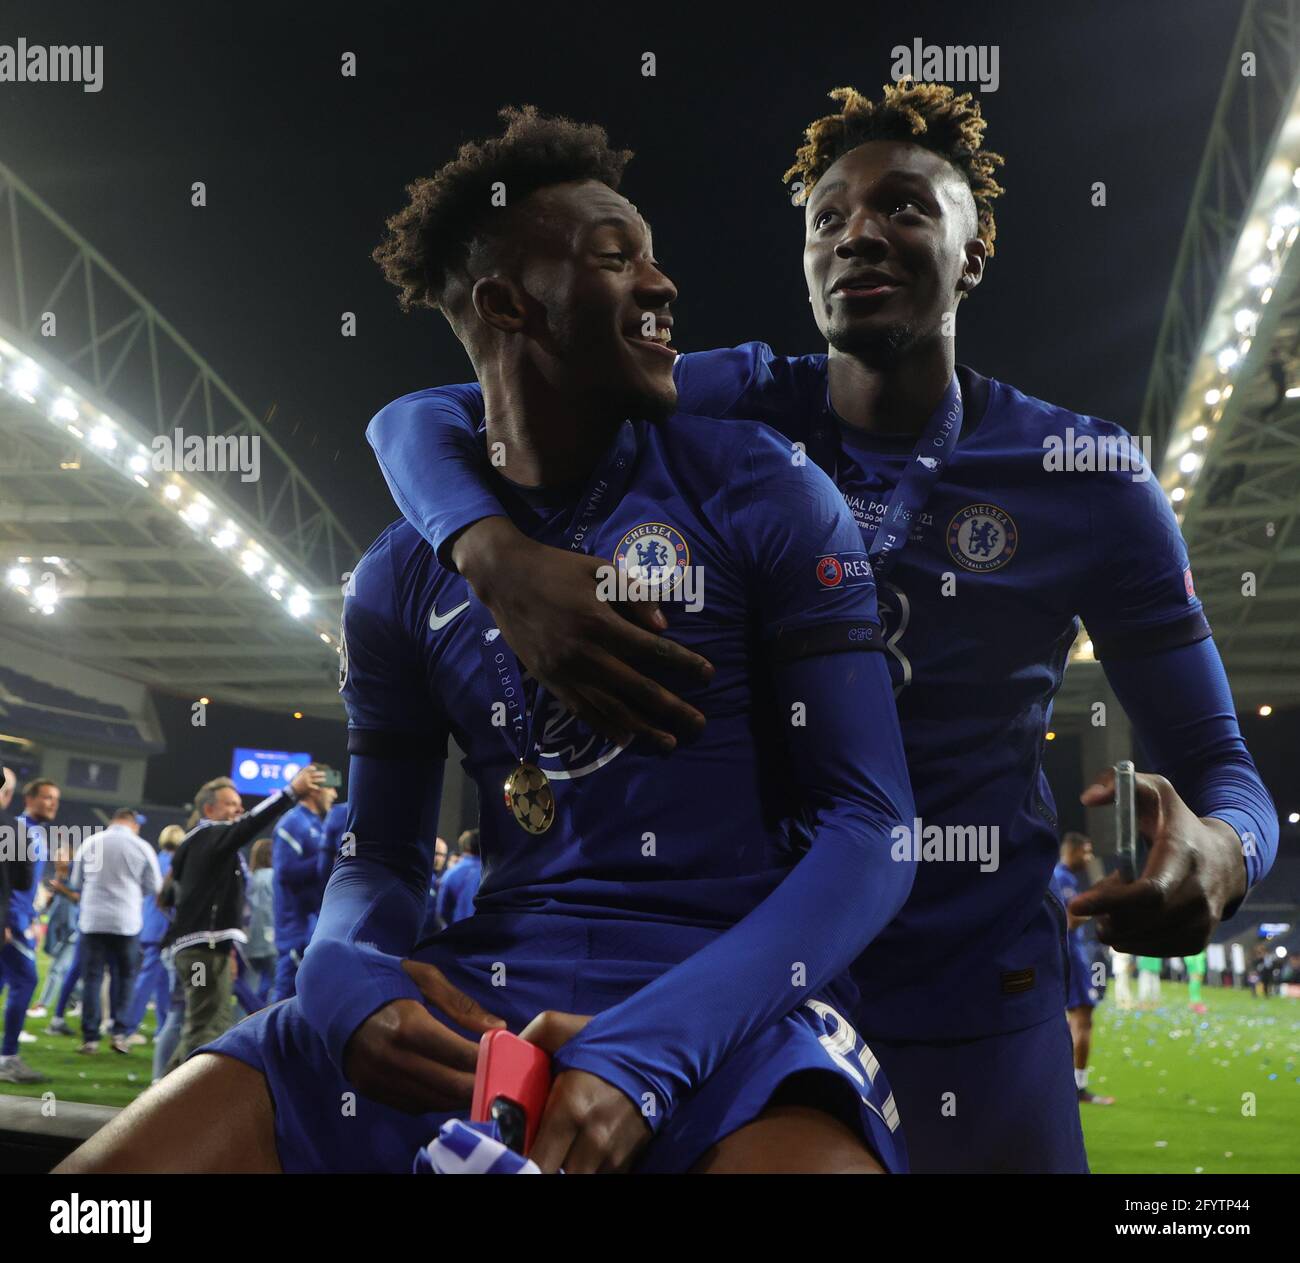 PORTO, PORTUGAL - MAY 29: Callum Hudson-Odoi [left] and Tammy Abrahams of Chelsea [right] celebrate after winning the UEFA Champions League Final against Manchester City at Estadio do Dragao on May 29, 2021 in Porto, Portugal. (Photo by MB Media) Stock Photo